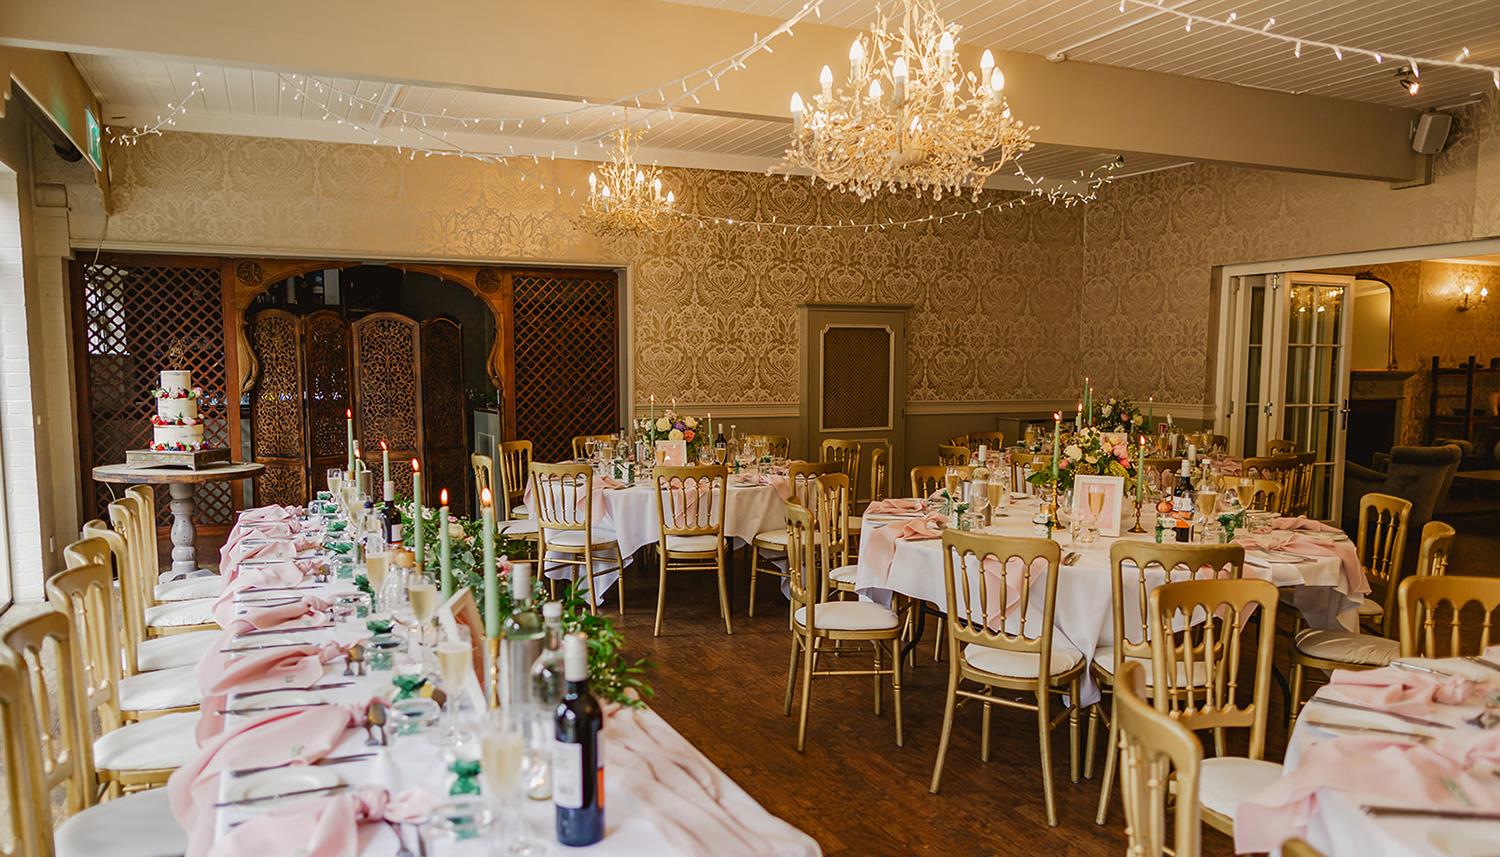 Tables ready. Photo Credit: Philip Quinnell Photography